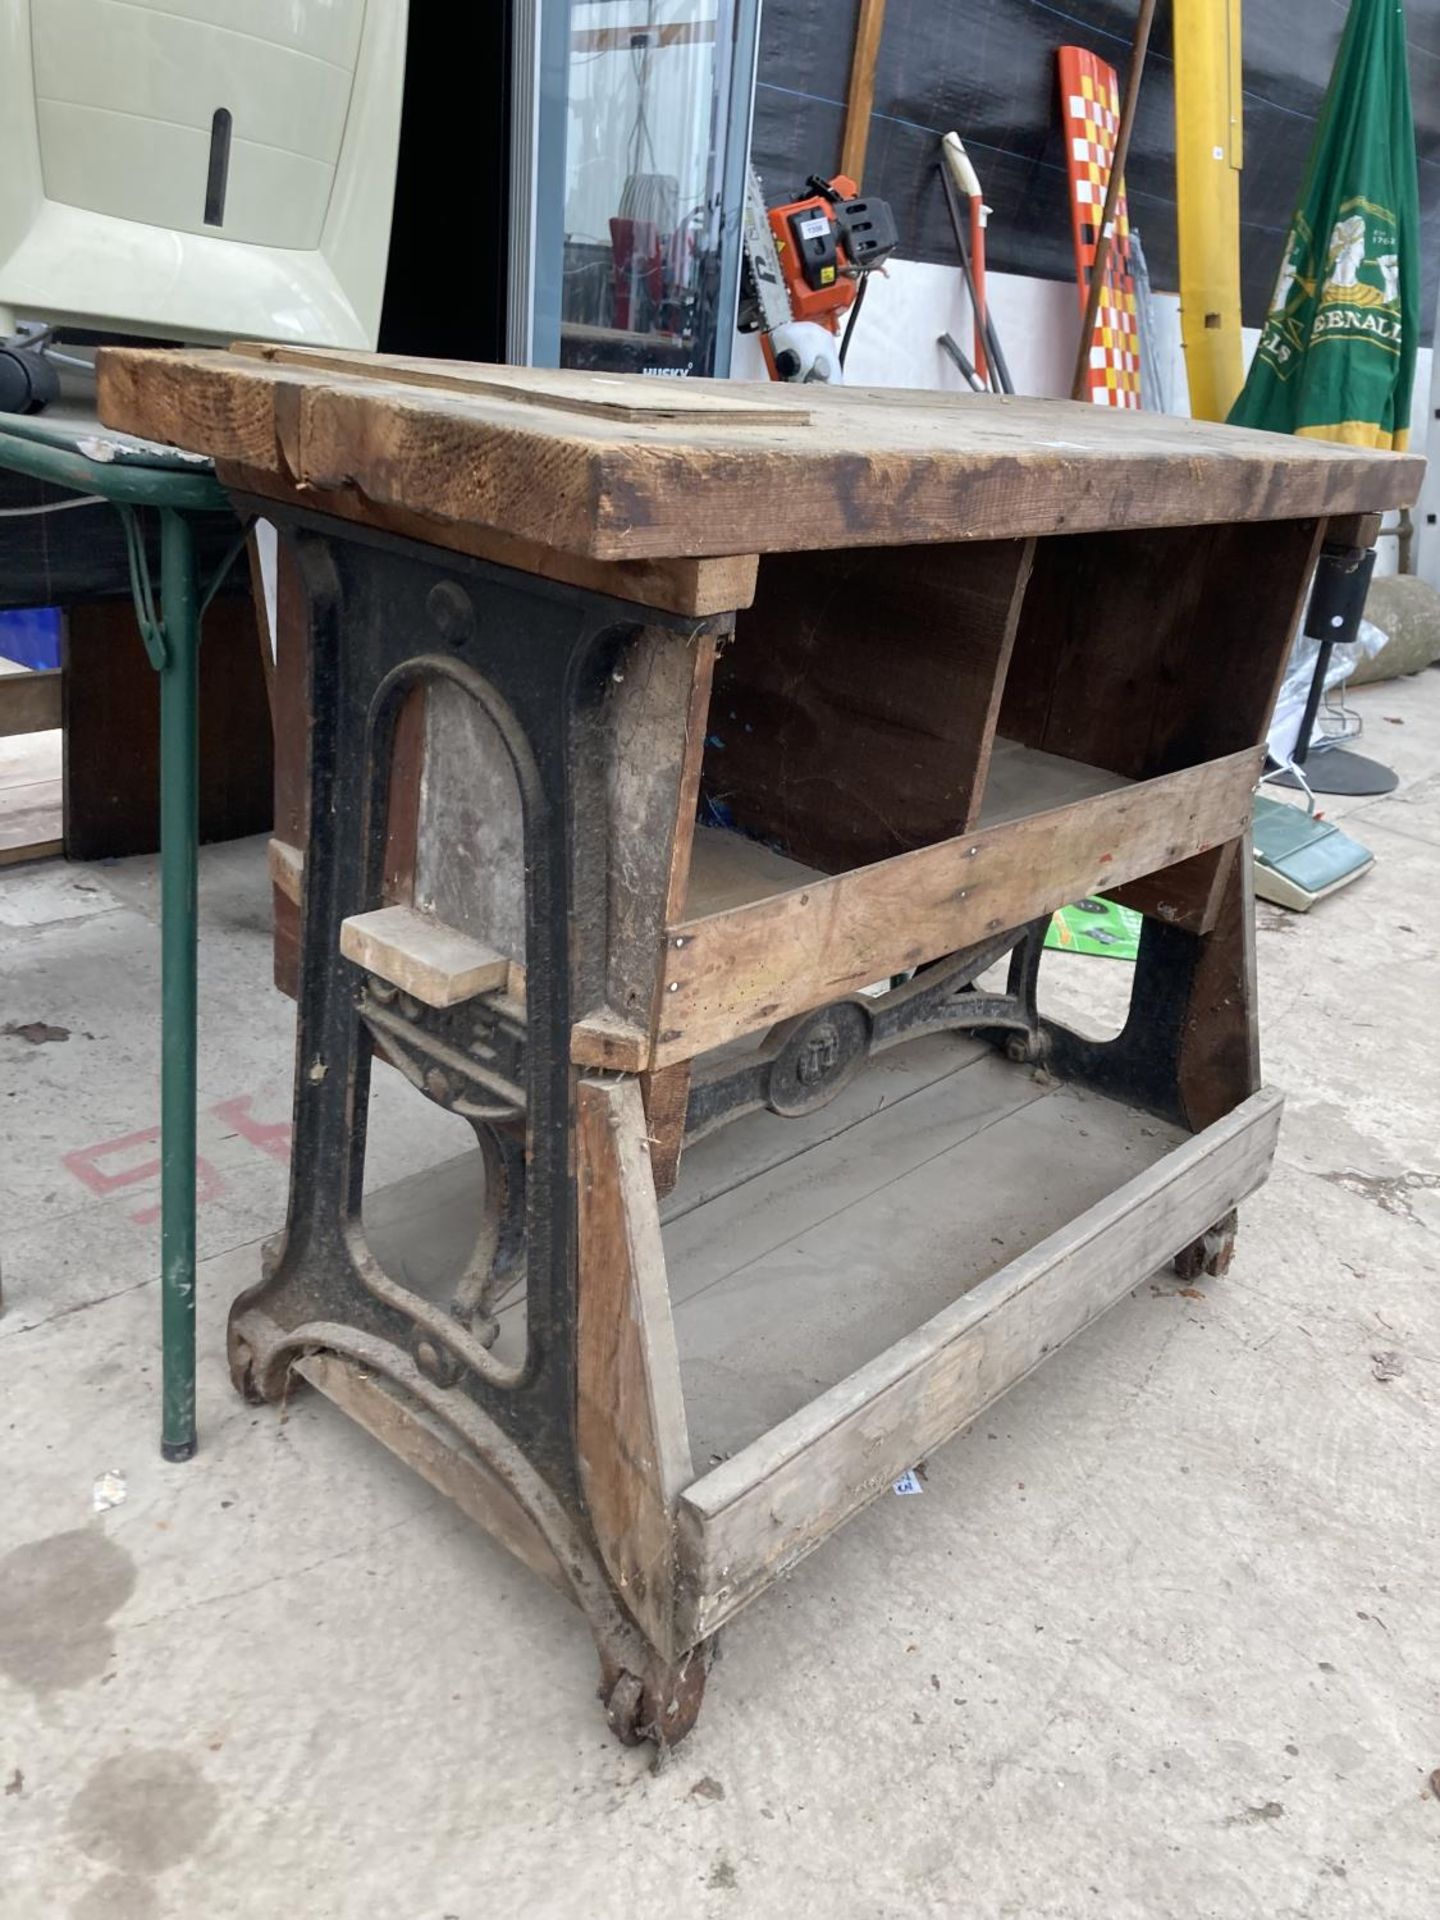 A VINTAGE WOODEN WORK BENCH WITH CAST IRON WHEELED BASE - Image 2 of 3